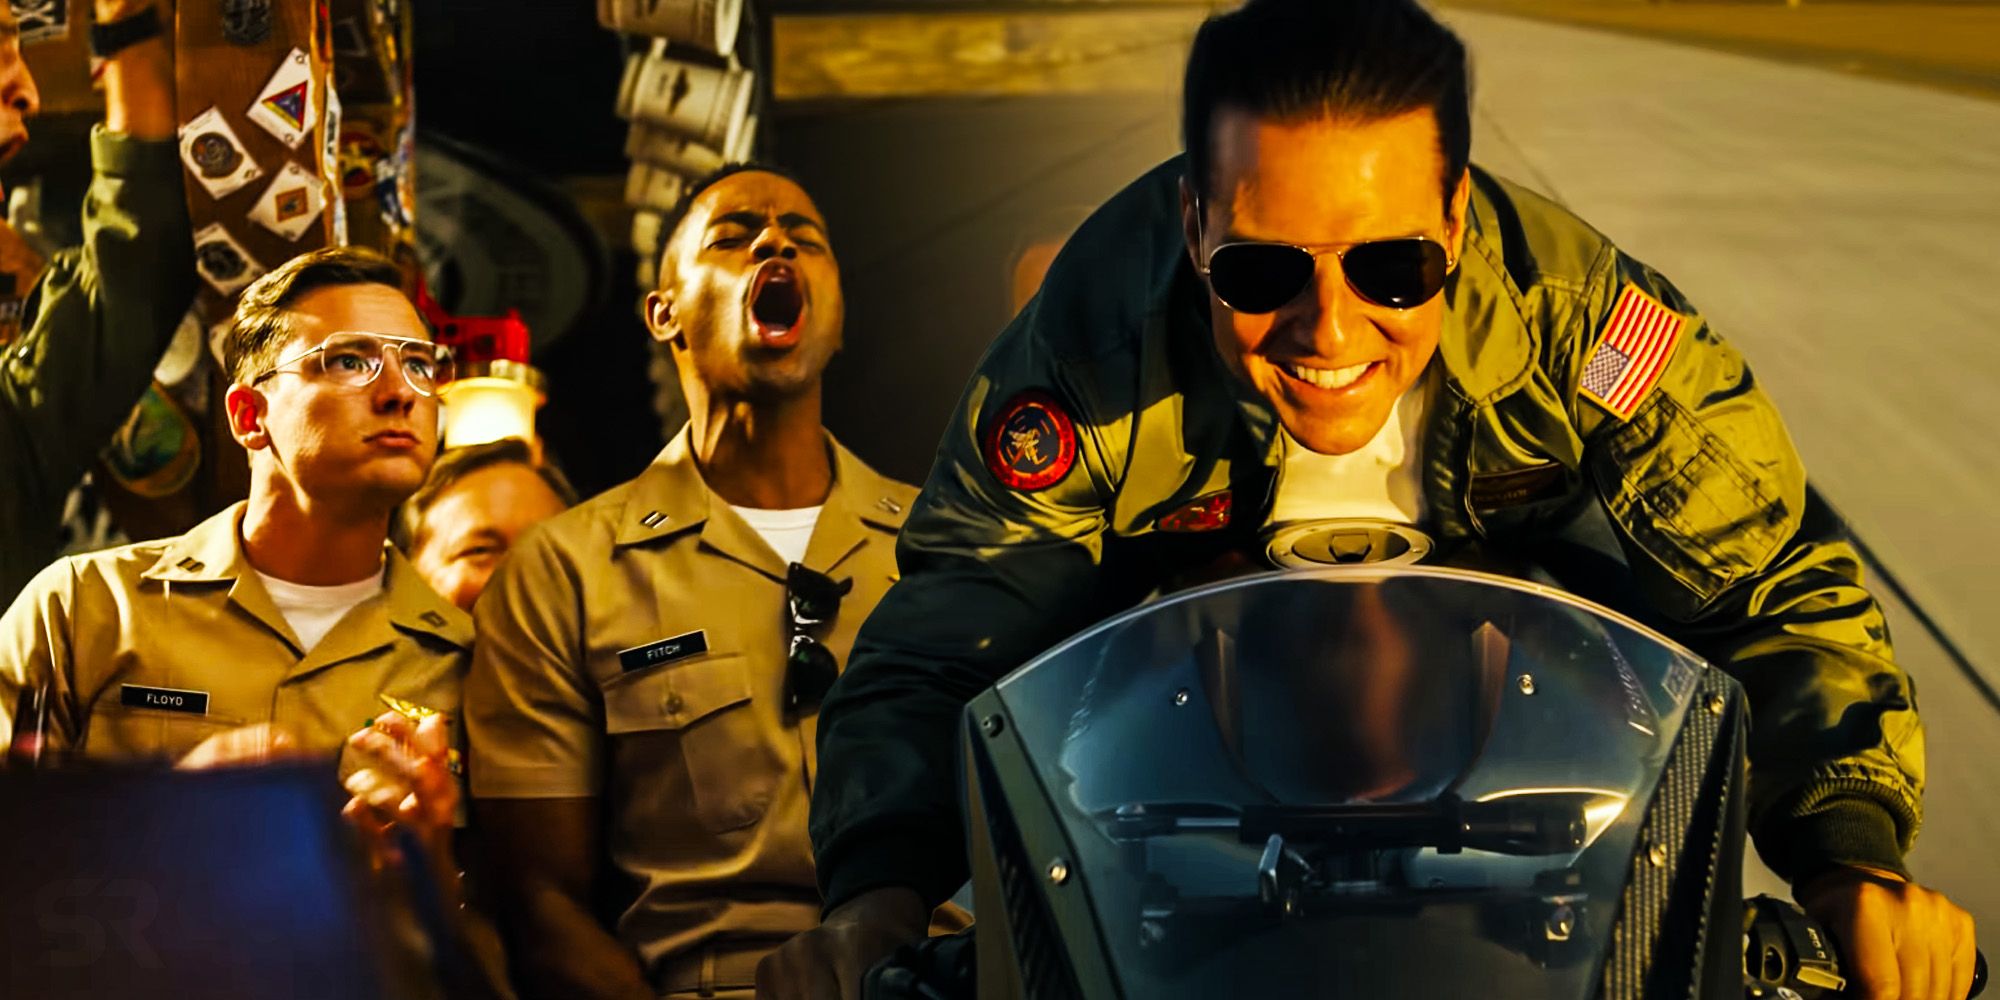 Lady Gaga will be contributing a song to the Top Gun: Maverick soundtrack